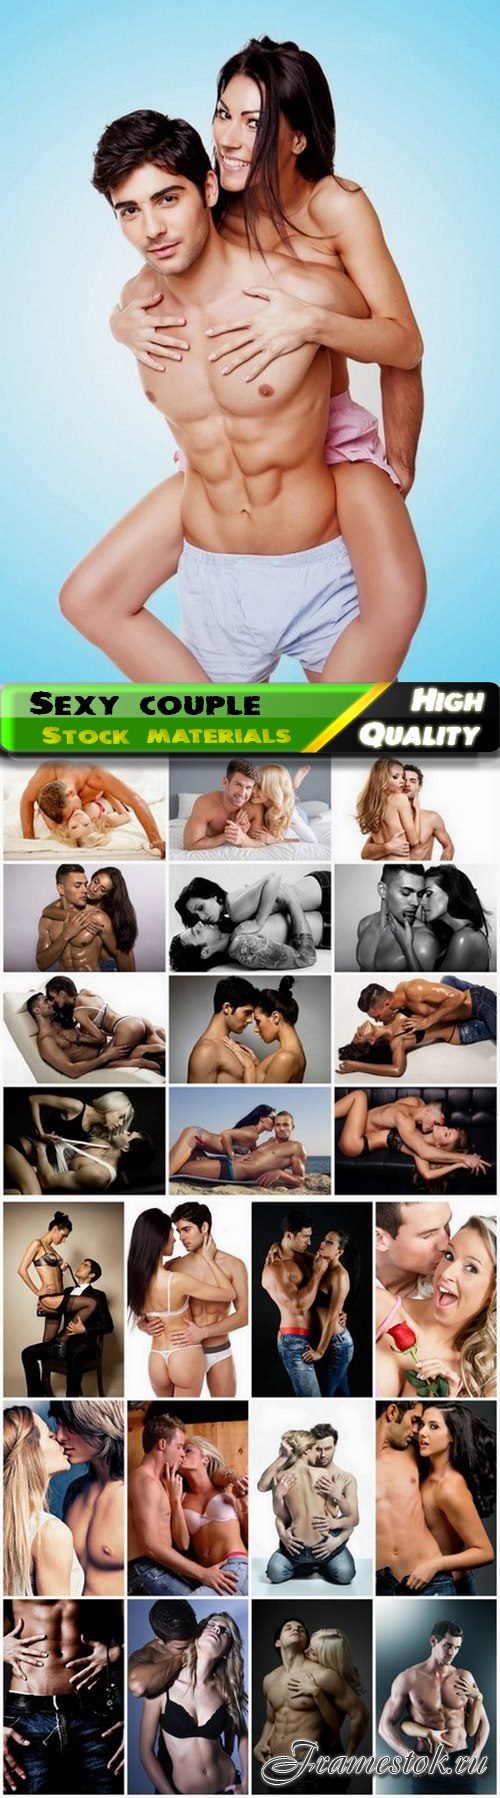 Sexy nude erotic couple of man and woman in love - 25 HQ Jpg